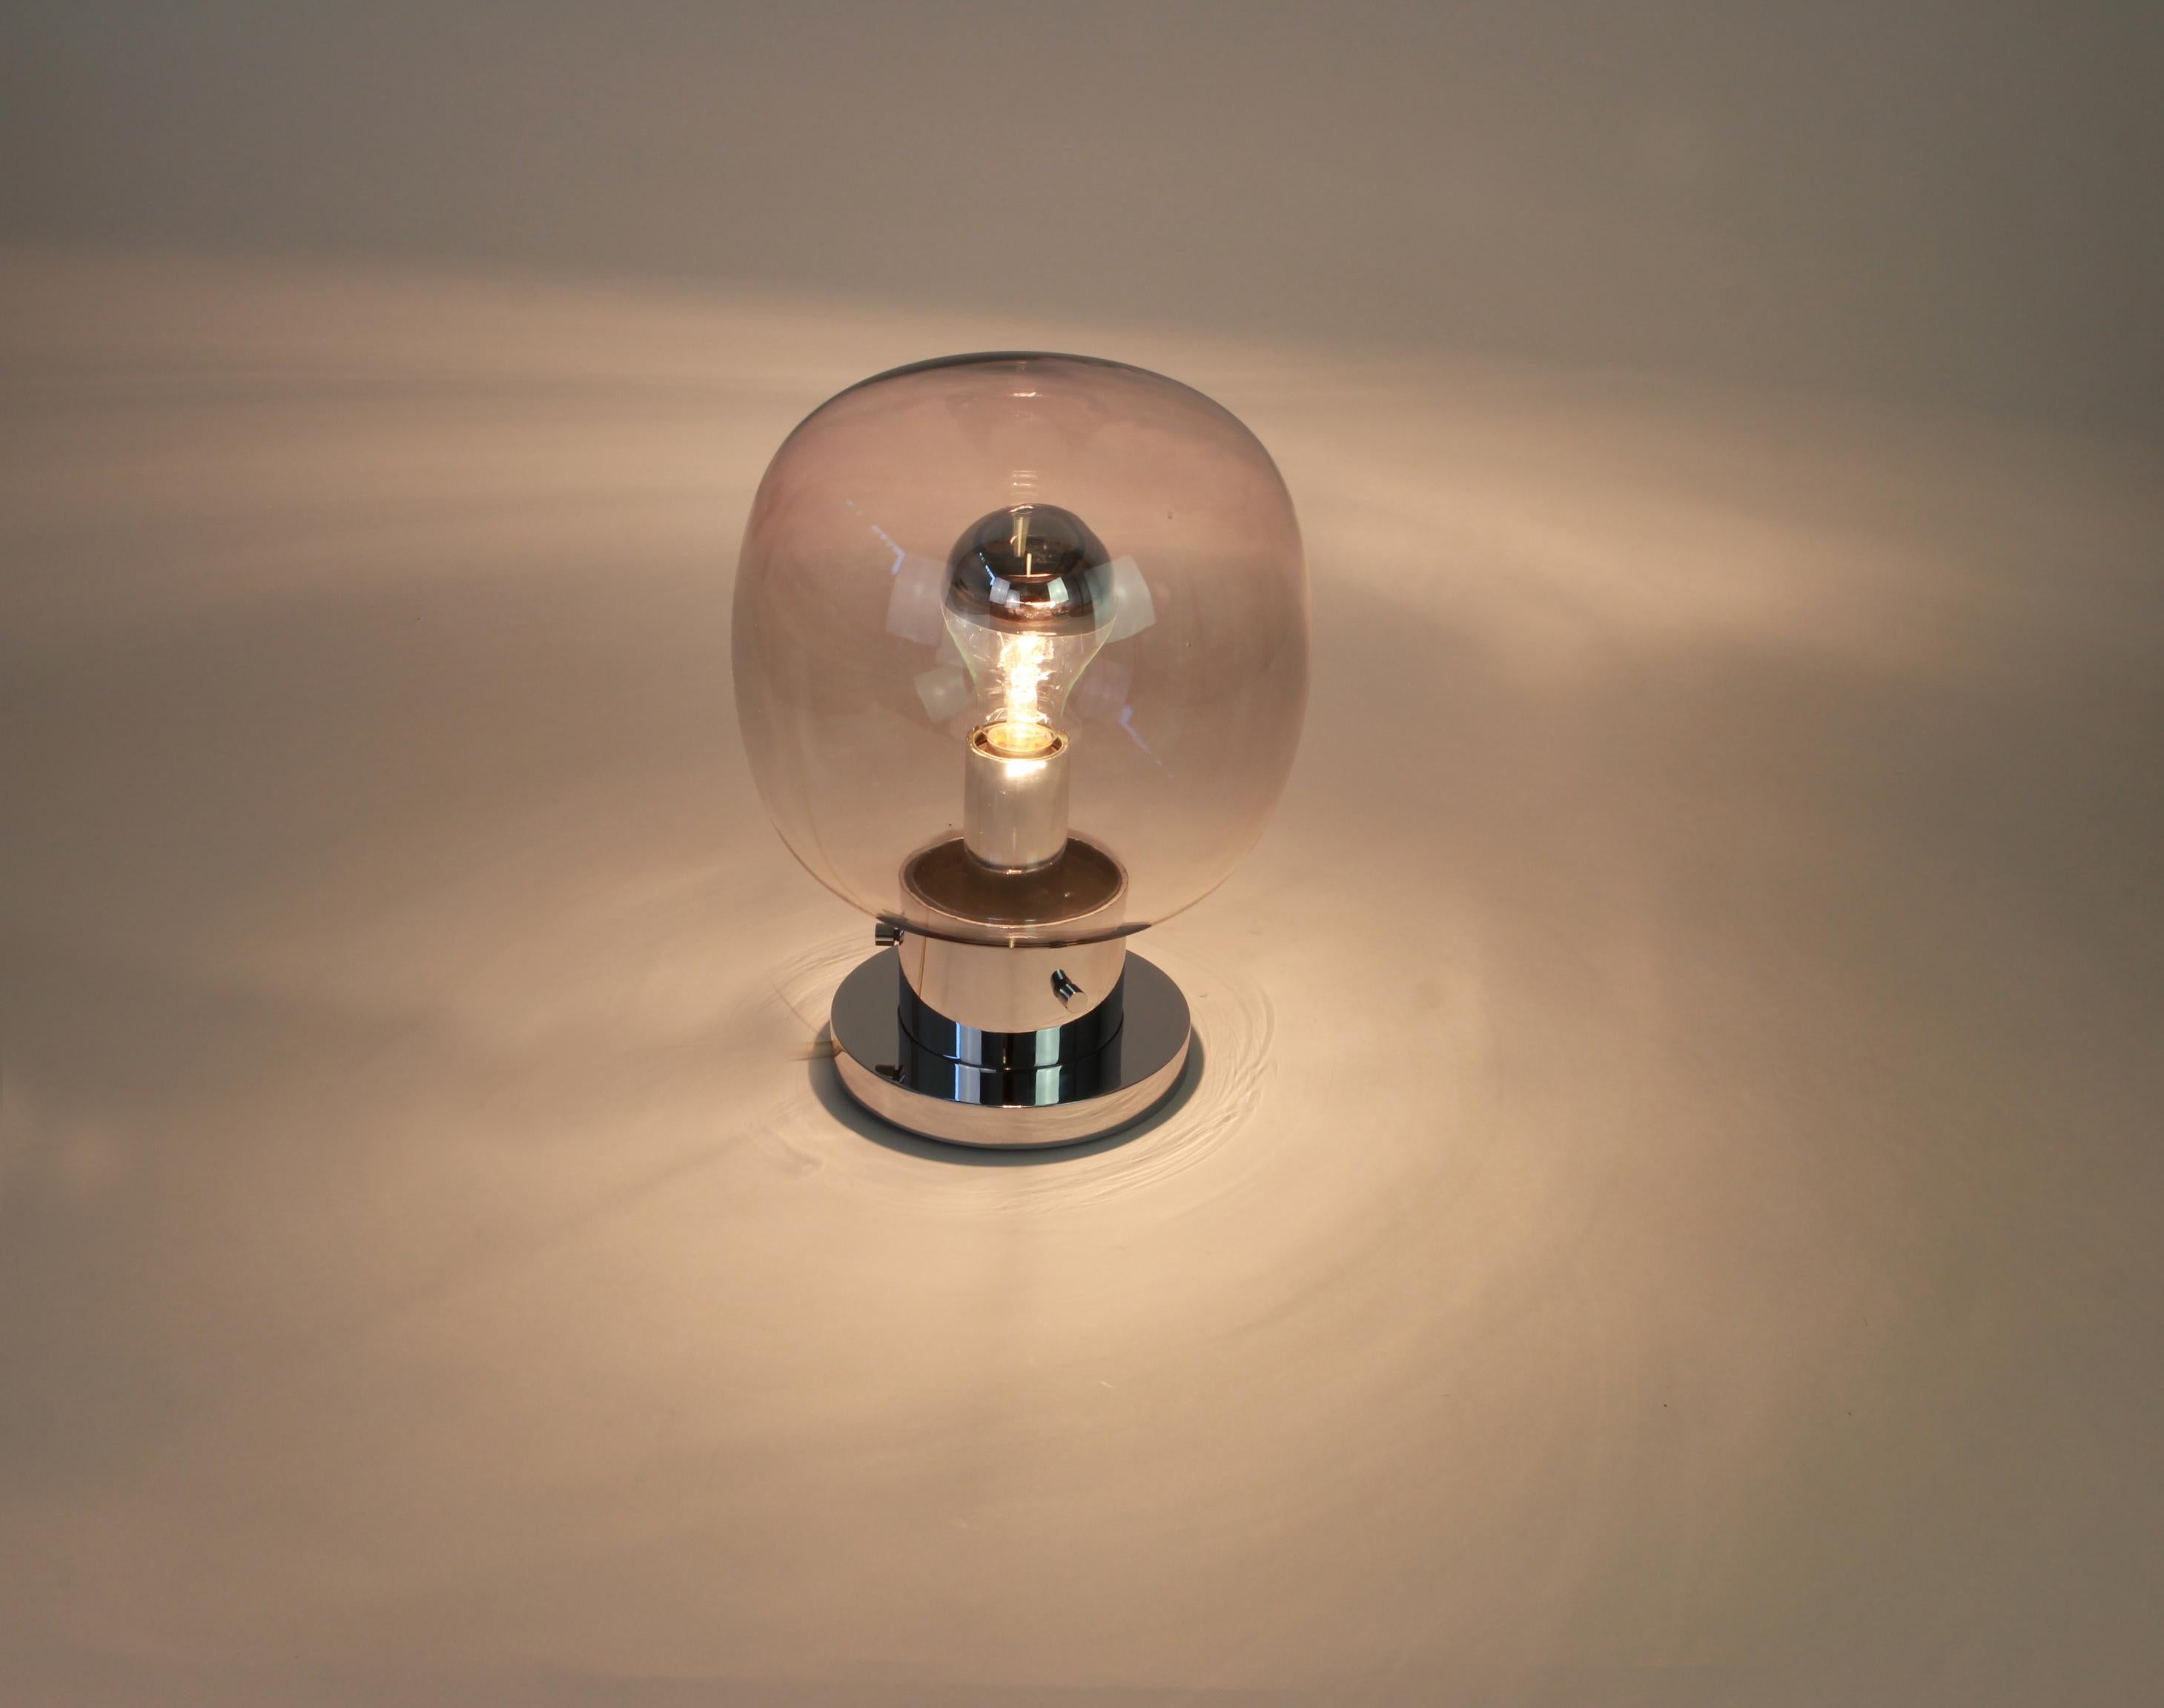 Stunning midcentury ceiling or wall lamp in Ball shape, by Glashütte Limburg, Germany, 1970s.
Made of smoked glass and Chrome.
Sockets: It needs 1 x E27 standard bulb and function on voltage from 110 till 240 volts.
Very good condition. //